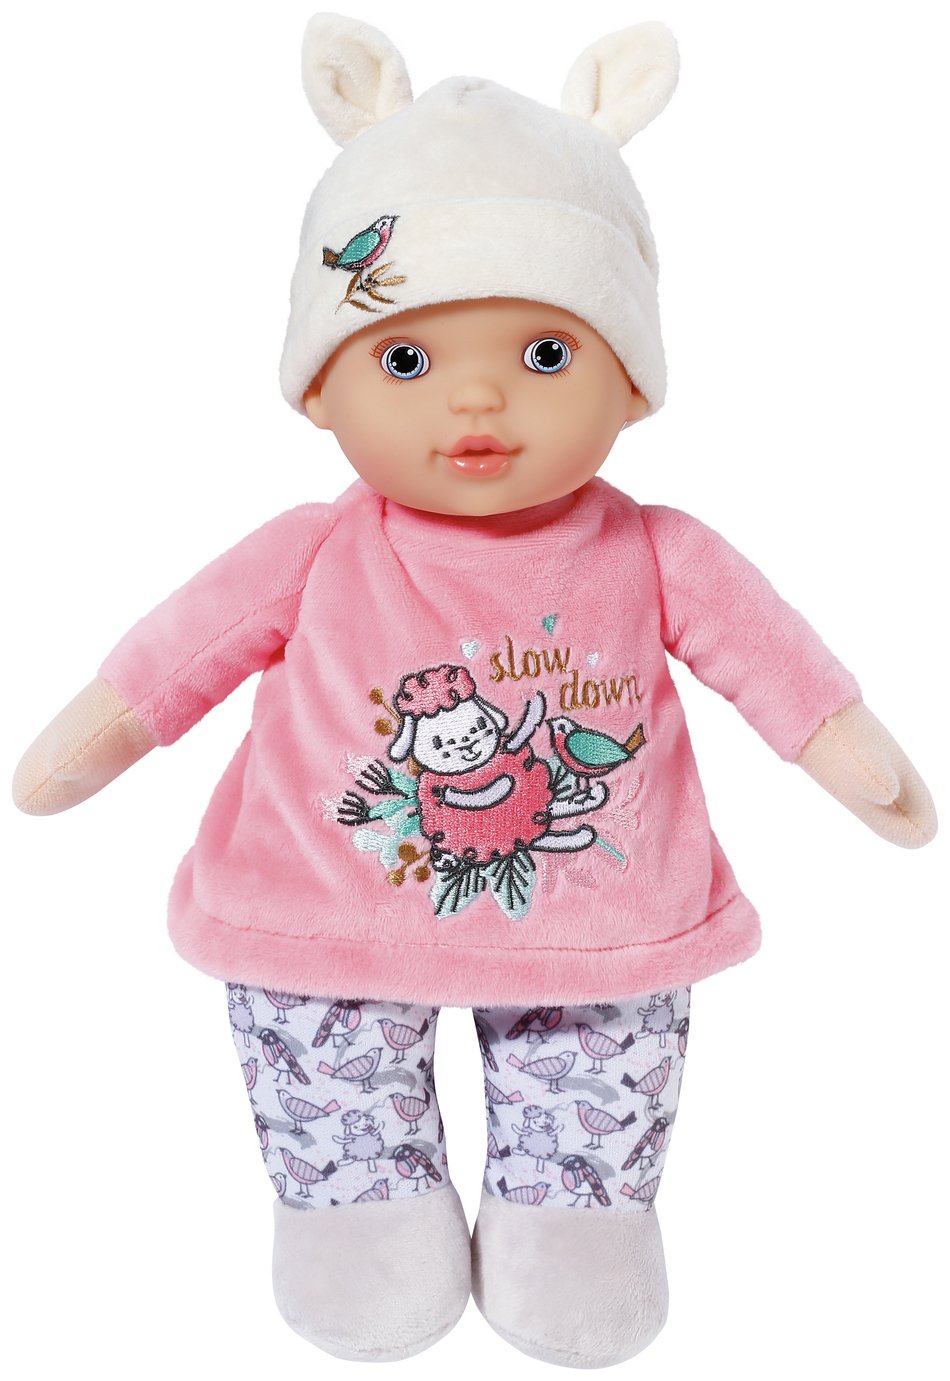 Baby Annabell Sweetie for Babies Doll Review